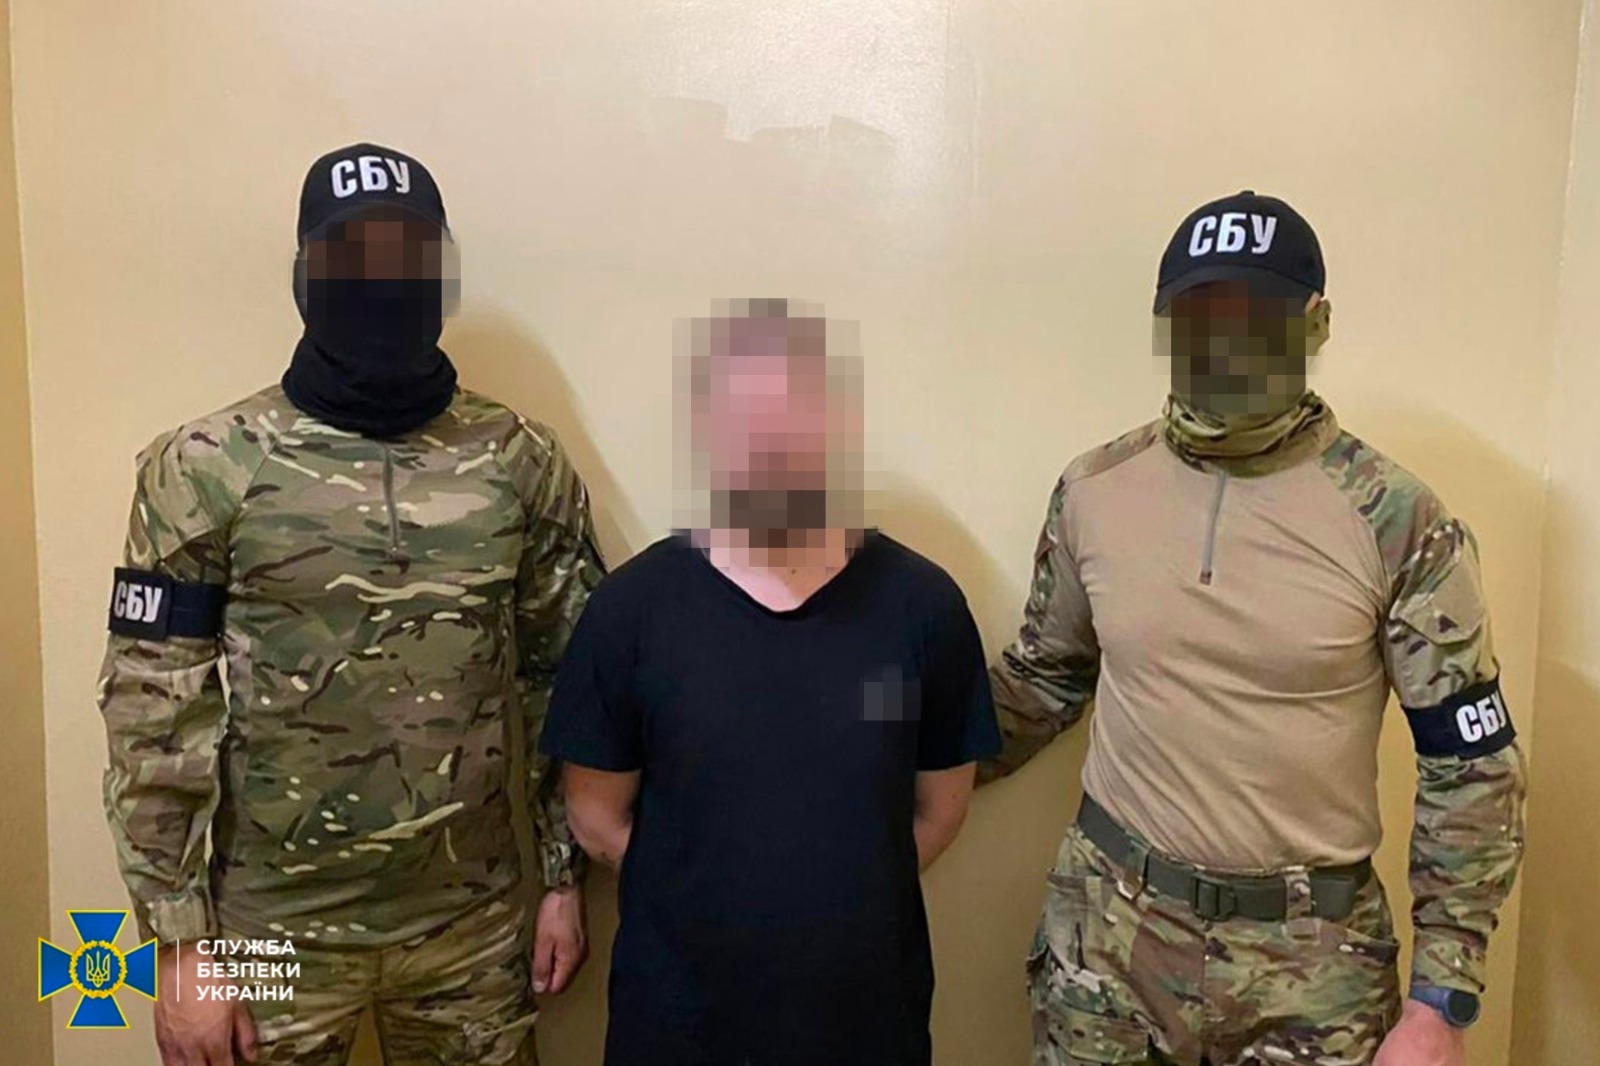 SBU exposes another Russian henchman in Ukraine (image courtesy: Facebook)